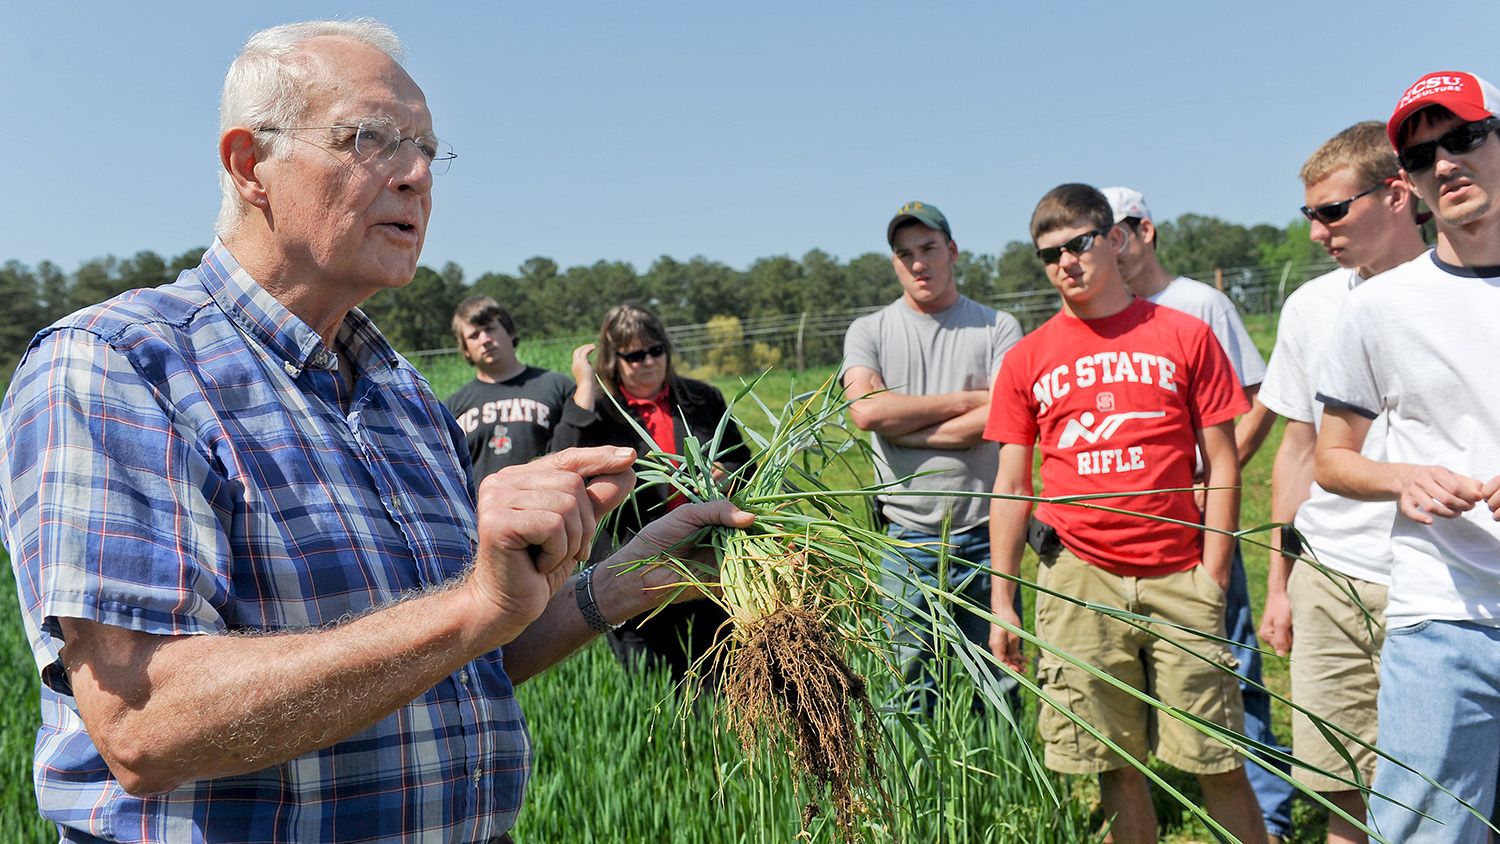 Bob Patterson with students outside in an agricultural field.